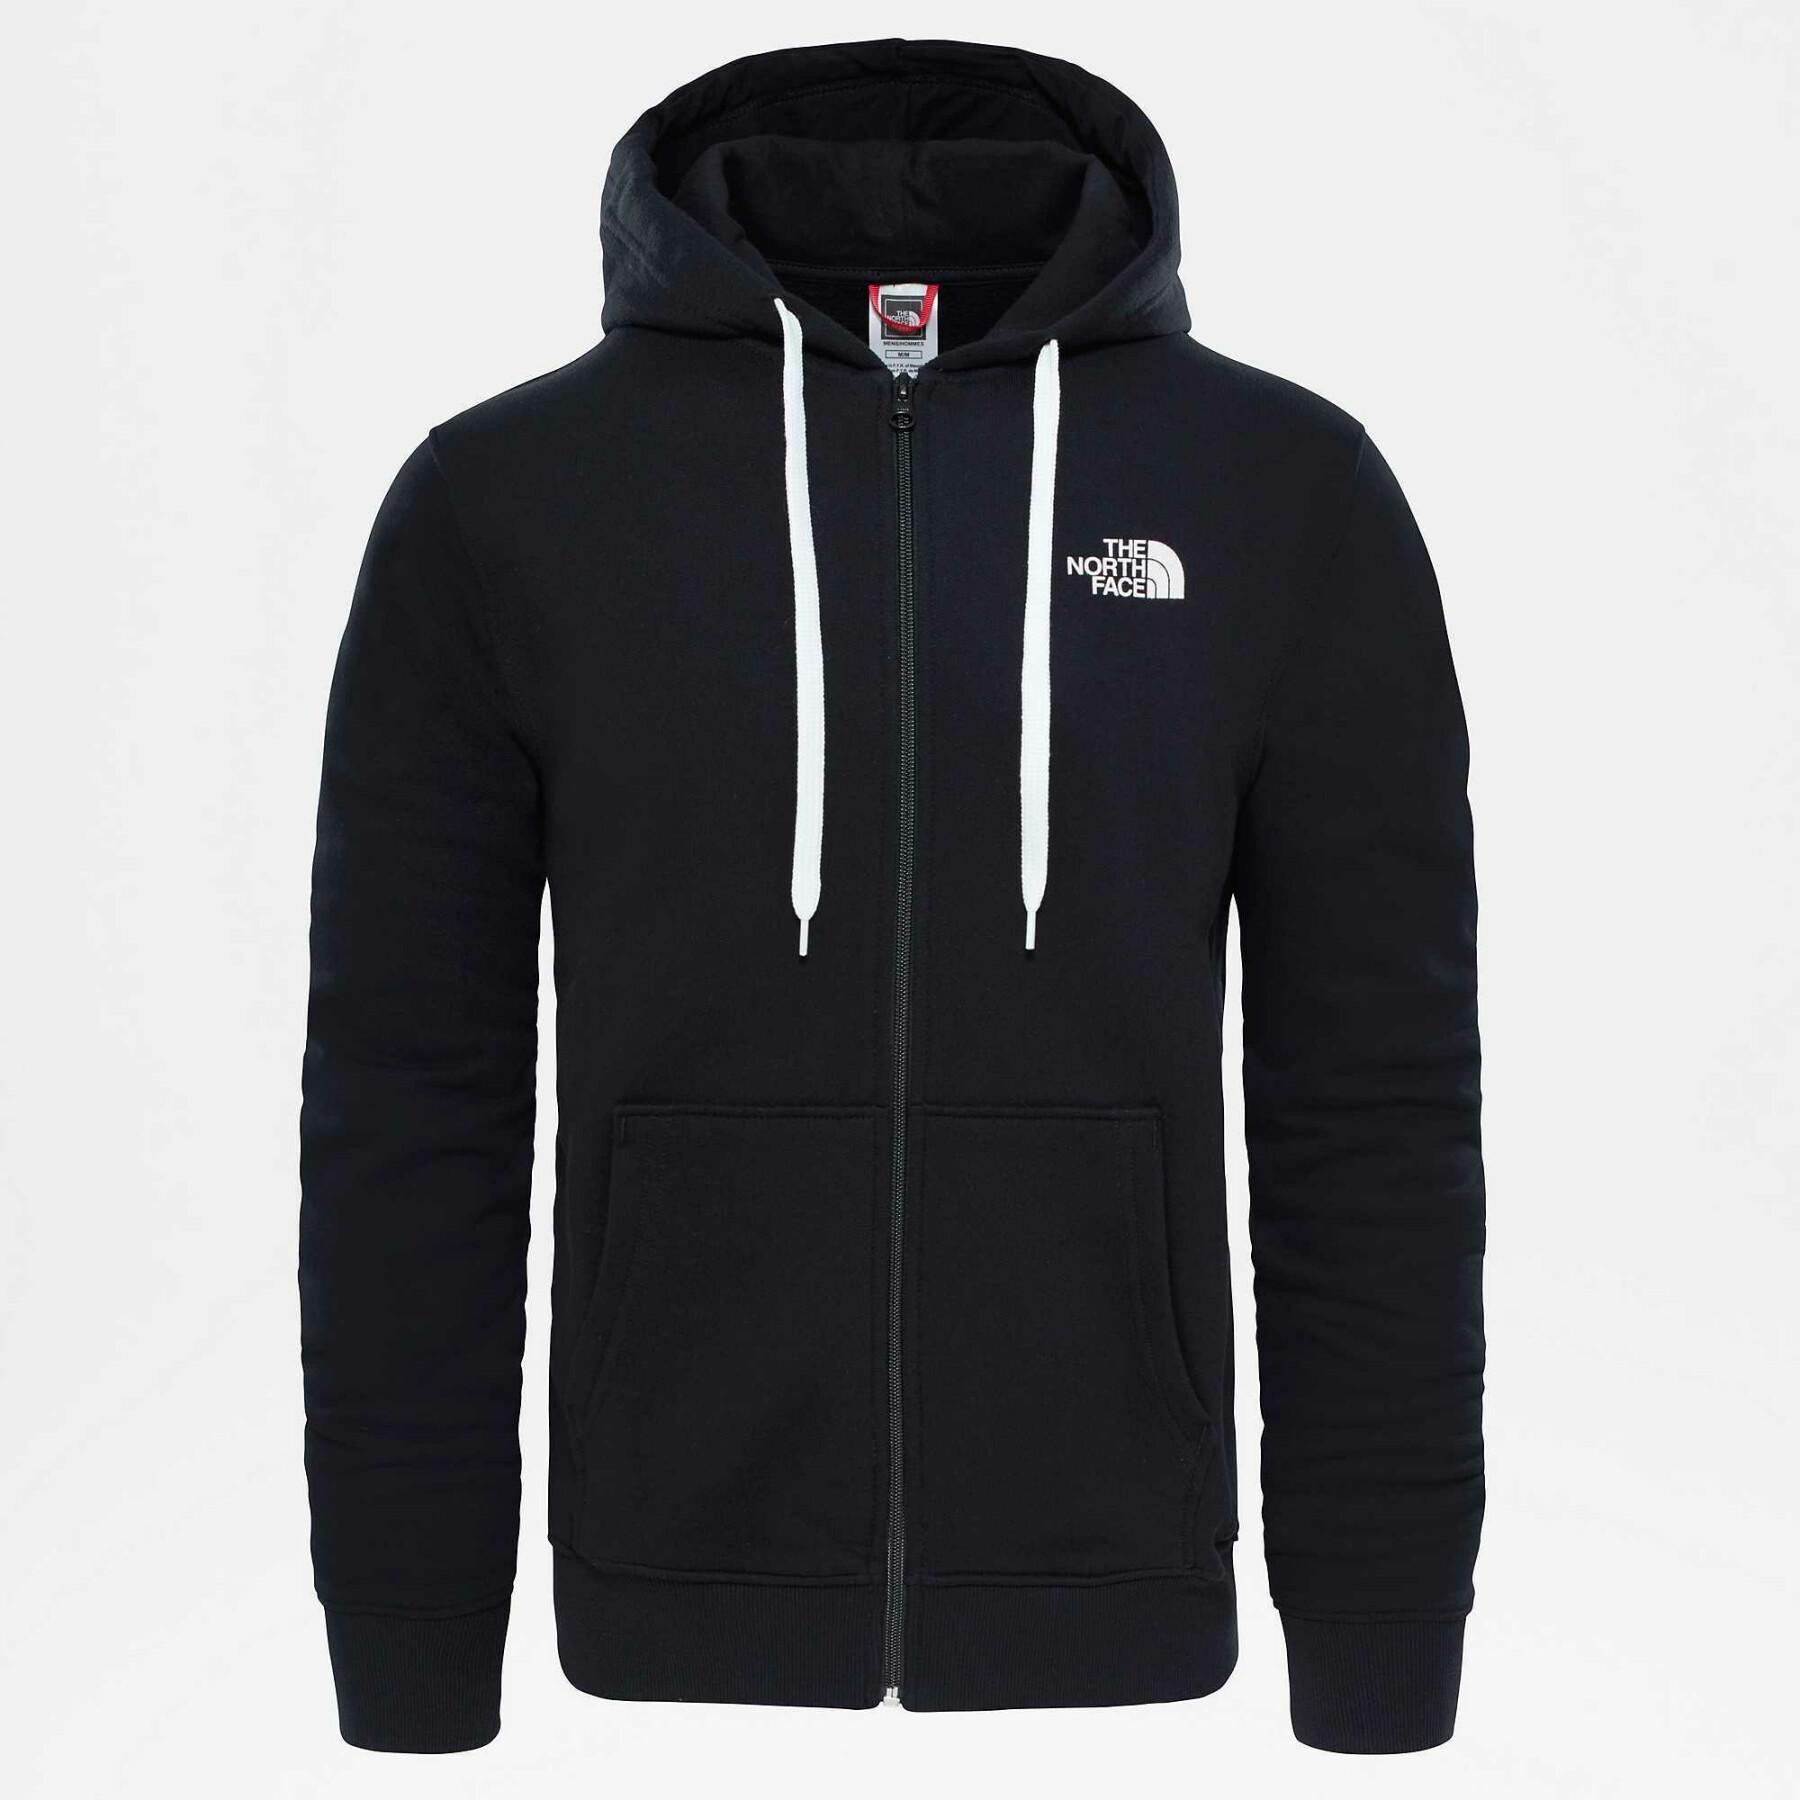 Hooded sweatshirt The North Face Open Gate